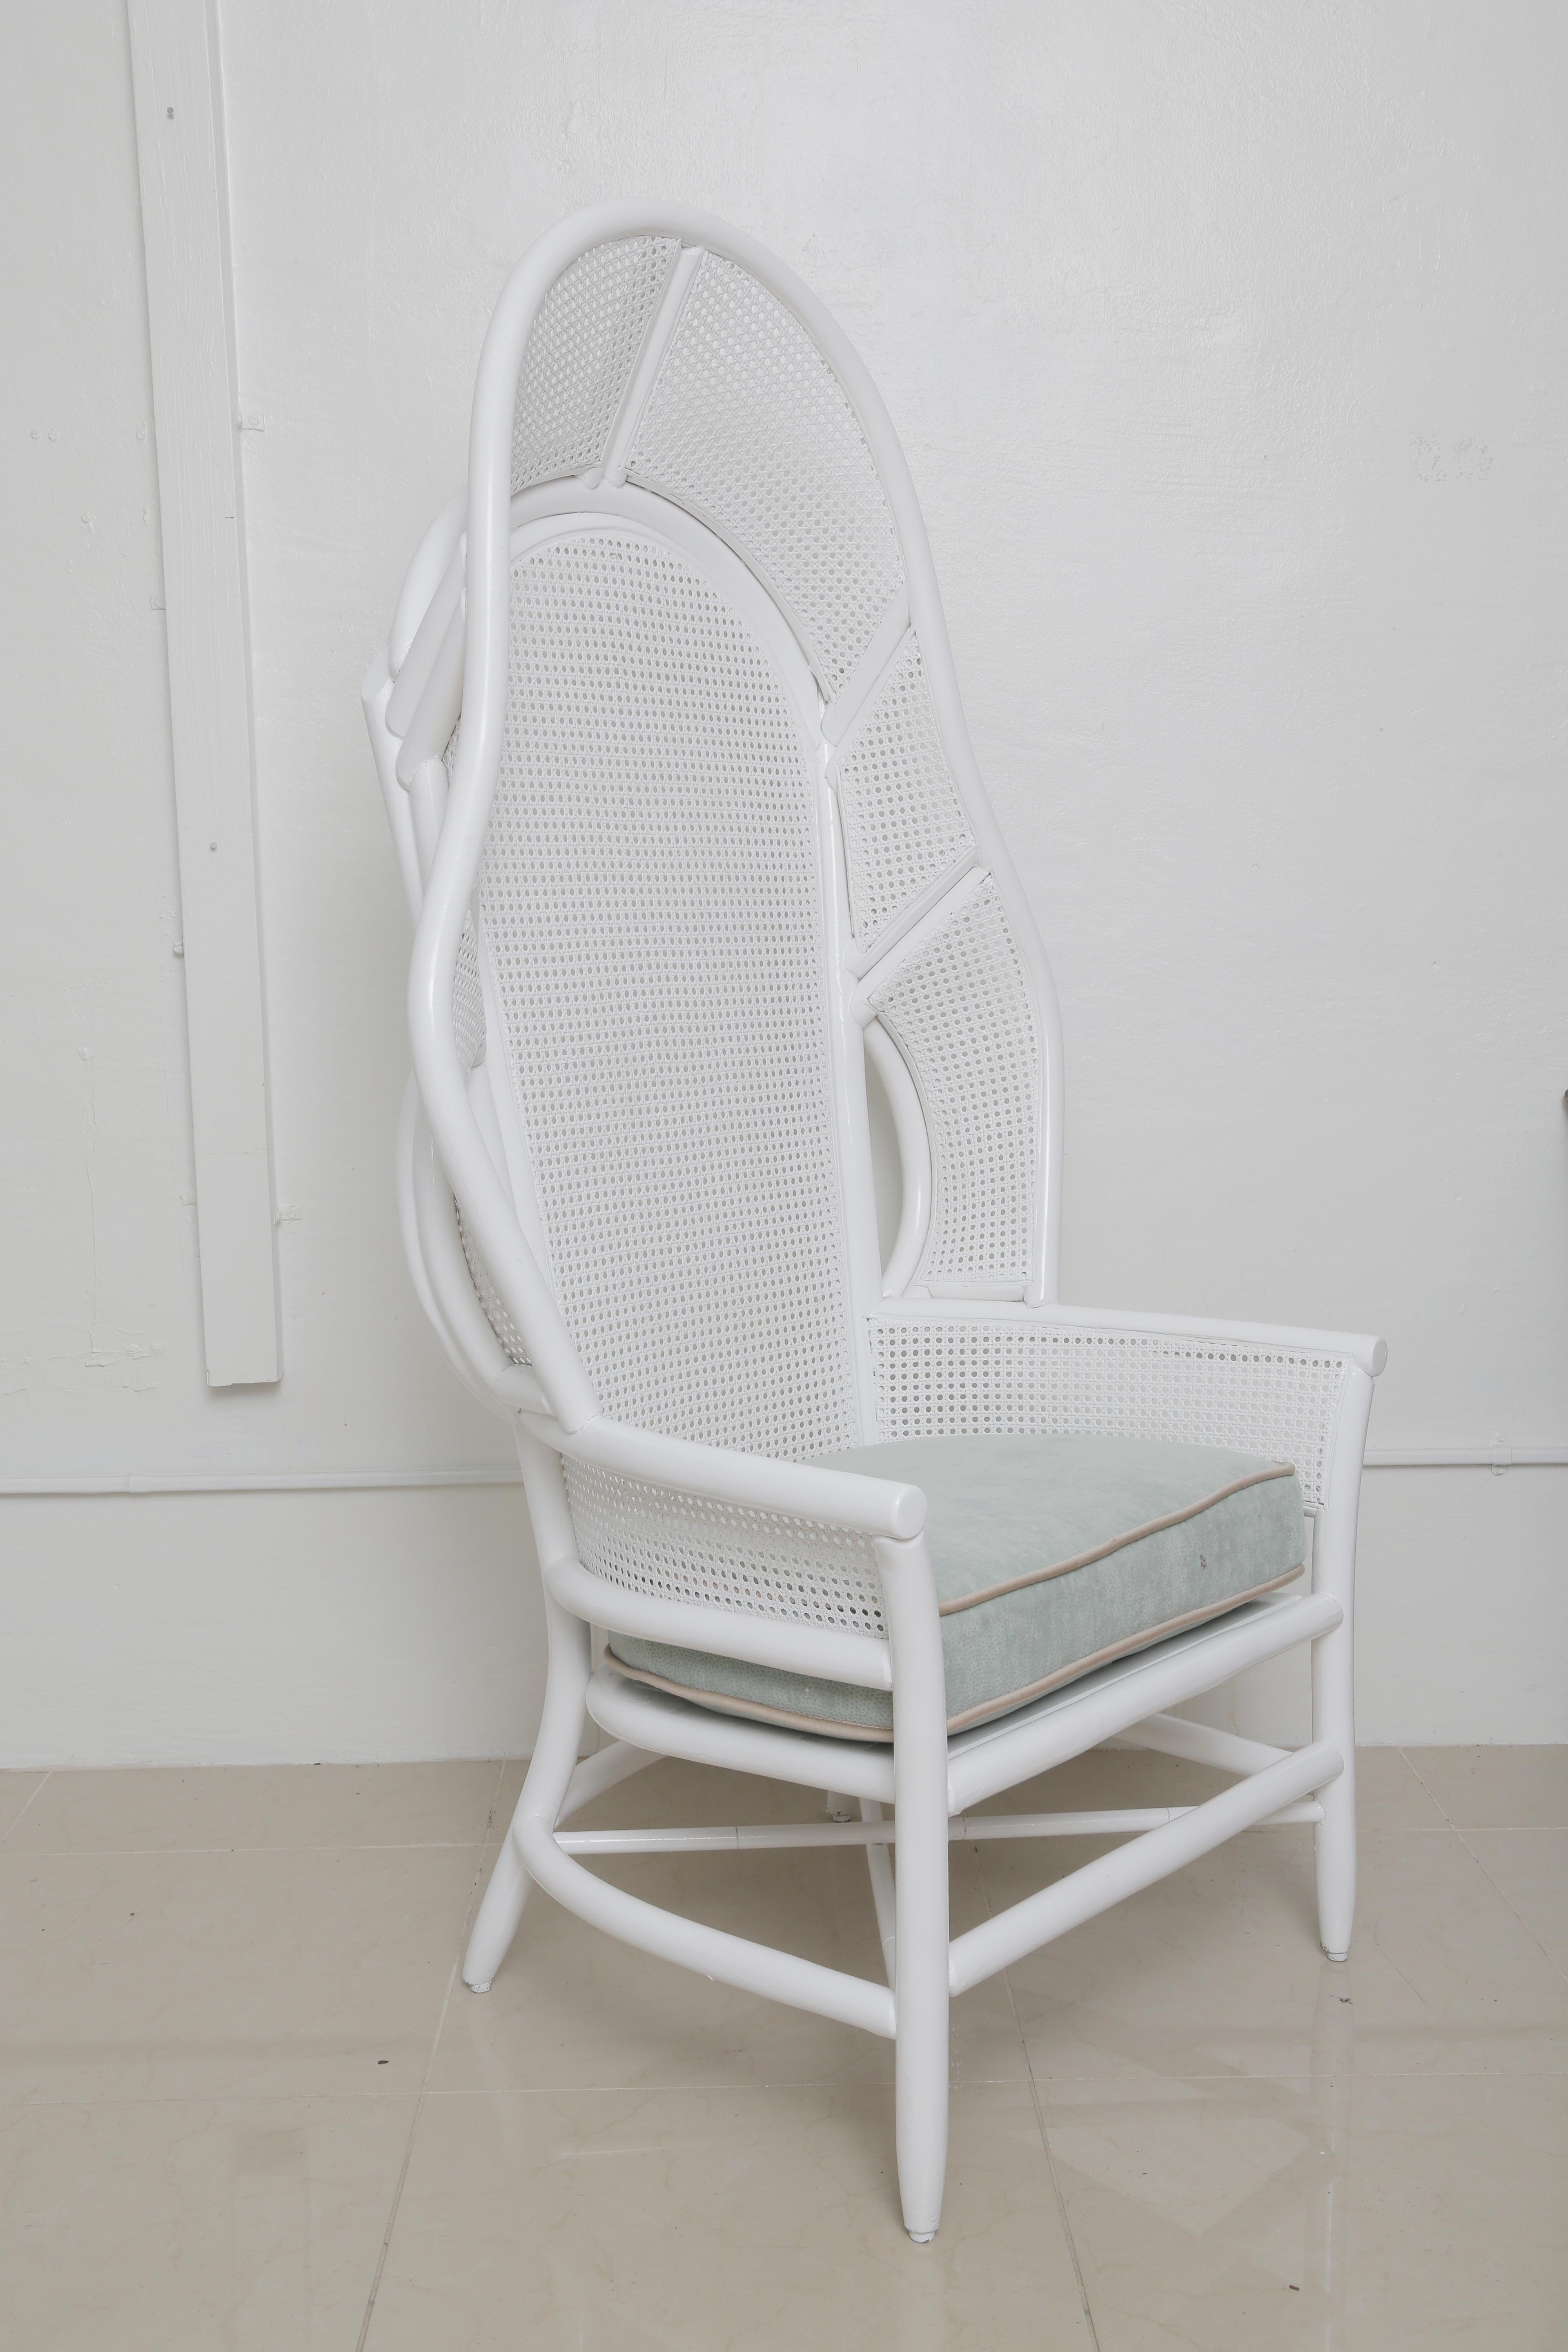 Cool white cool vintage cane high back chair with rattan.